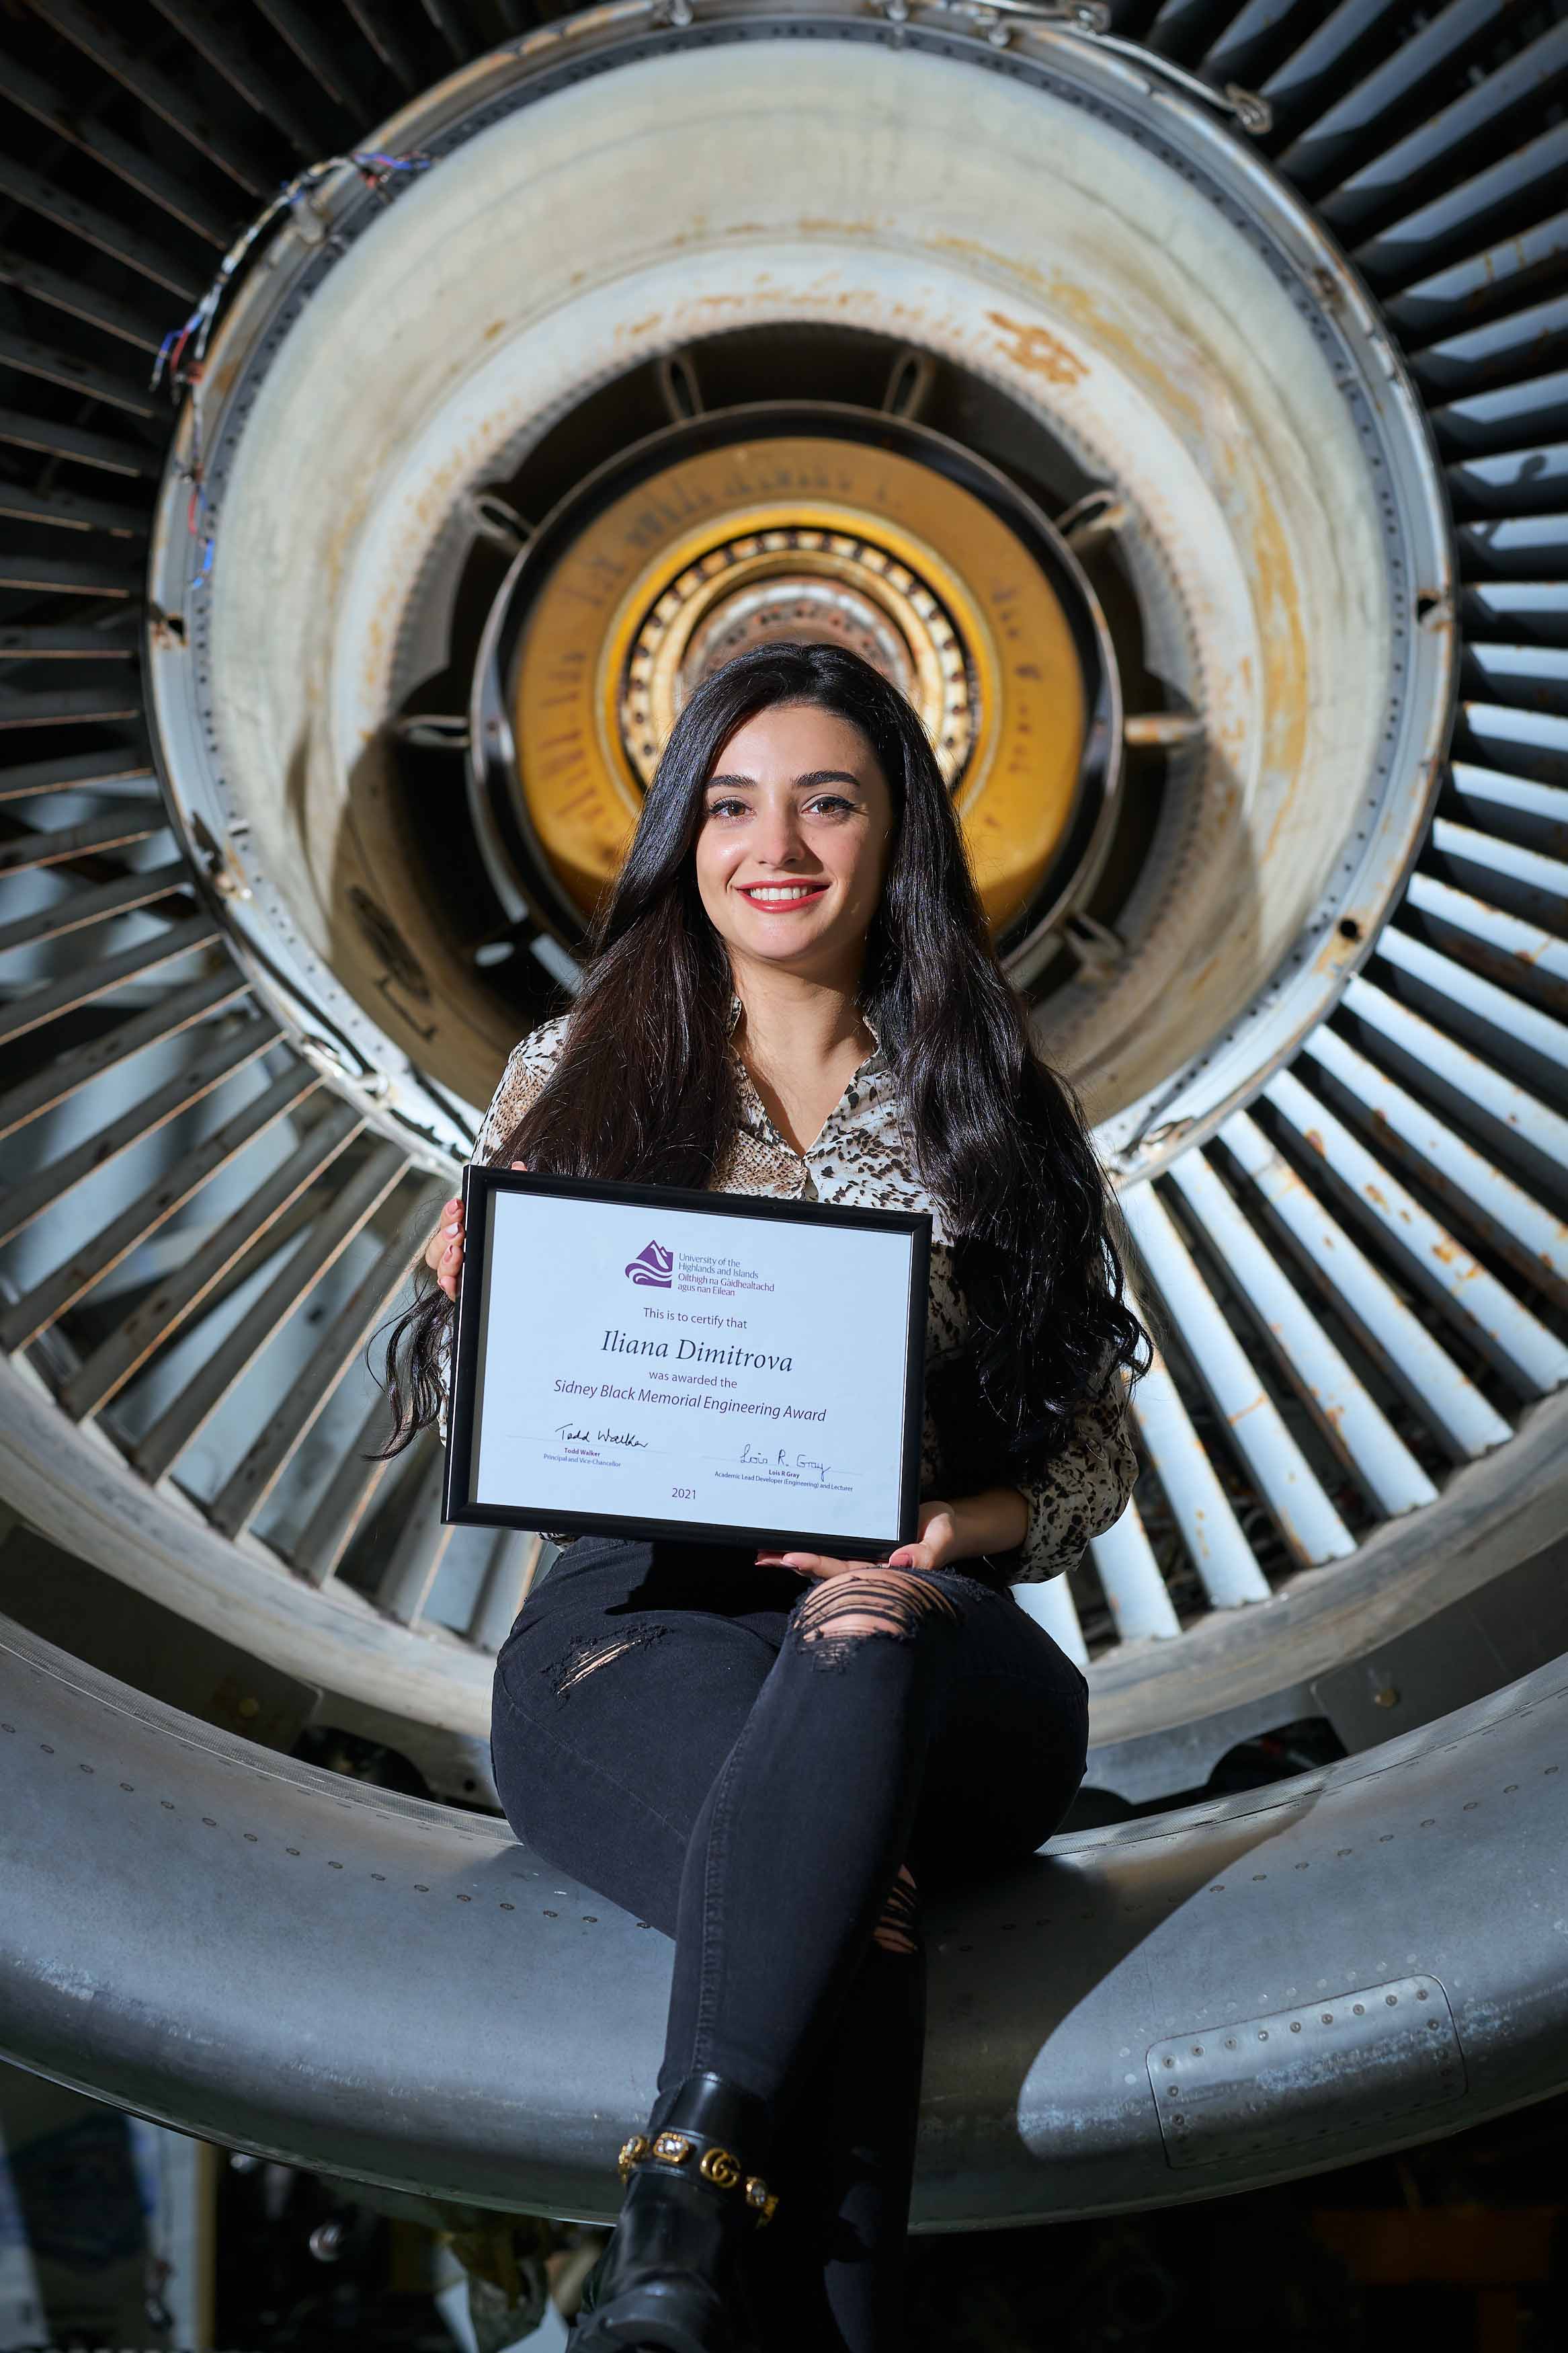 Perth student wins first Engineering Memorial Award